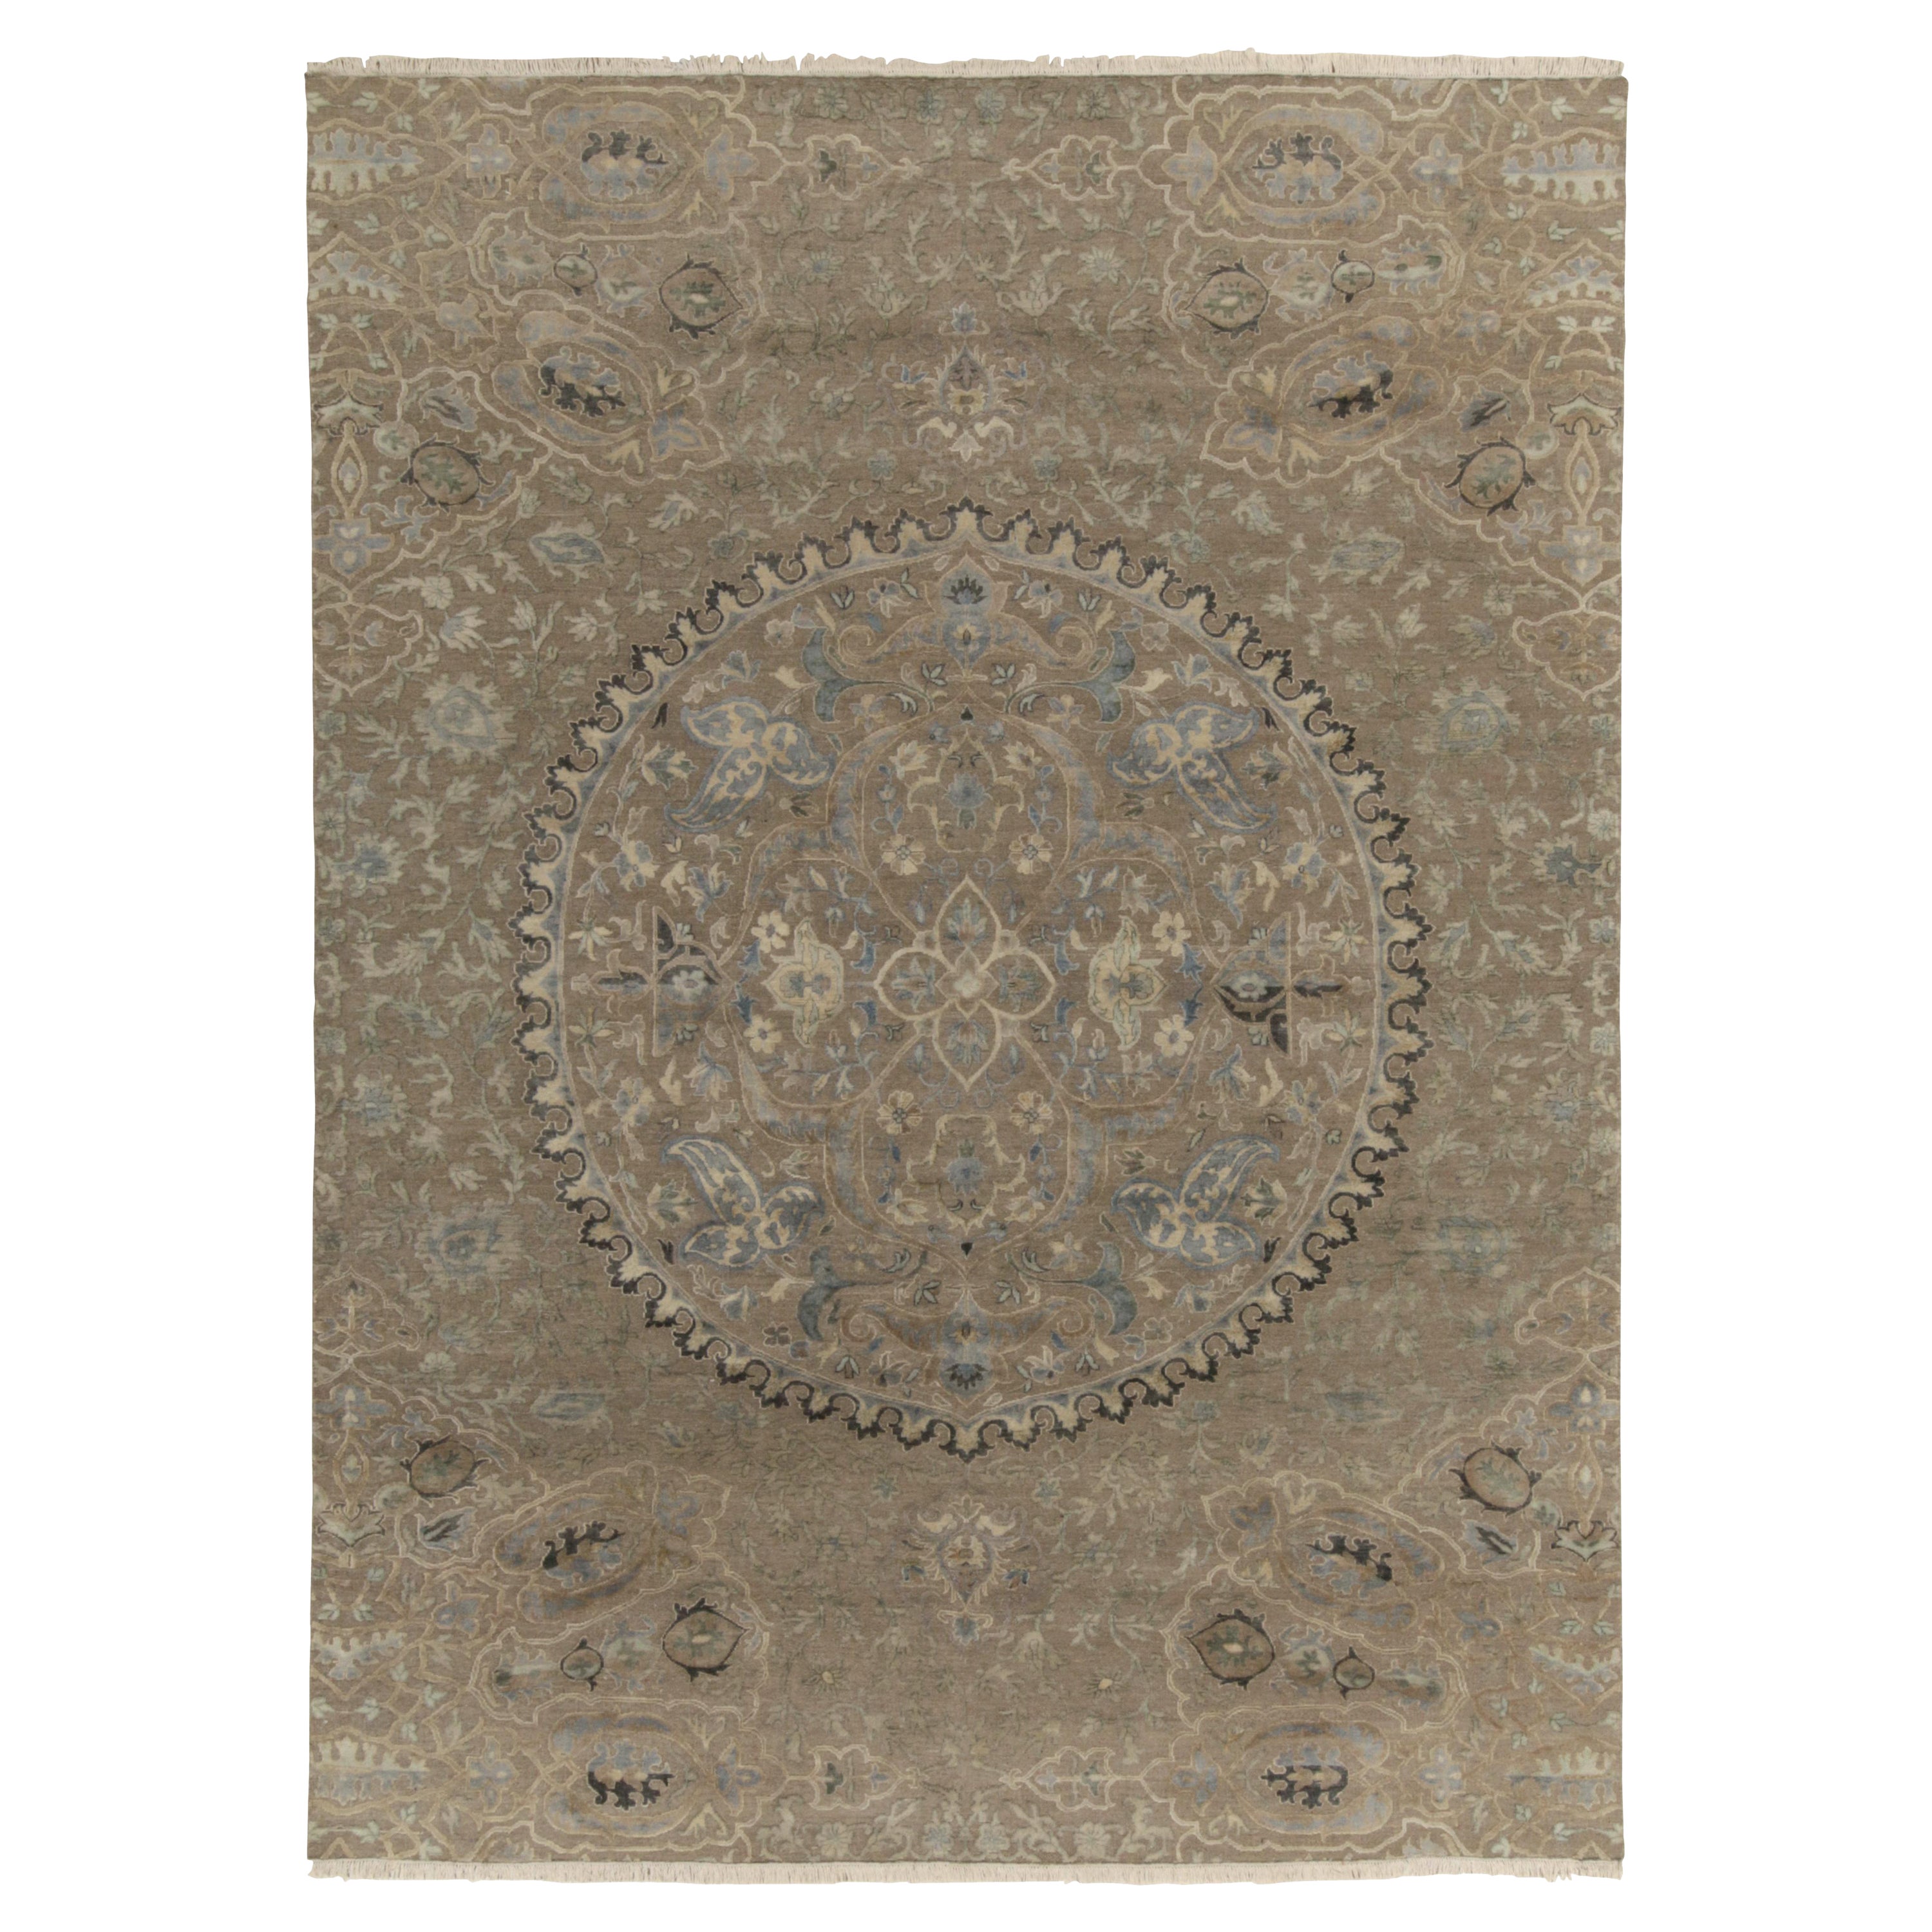 Rug & Kilim’s Classic style rug in Beige, Gray and Blue Medallion Floral Pattern For Sale